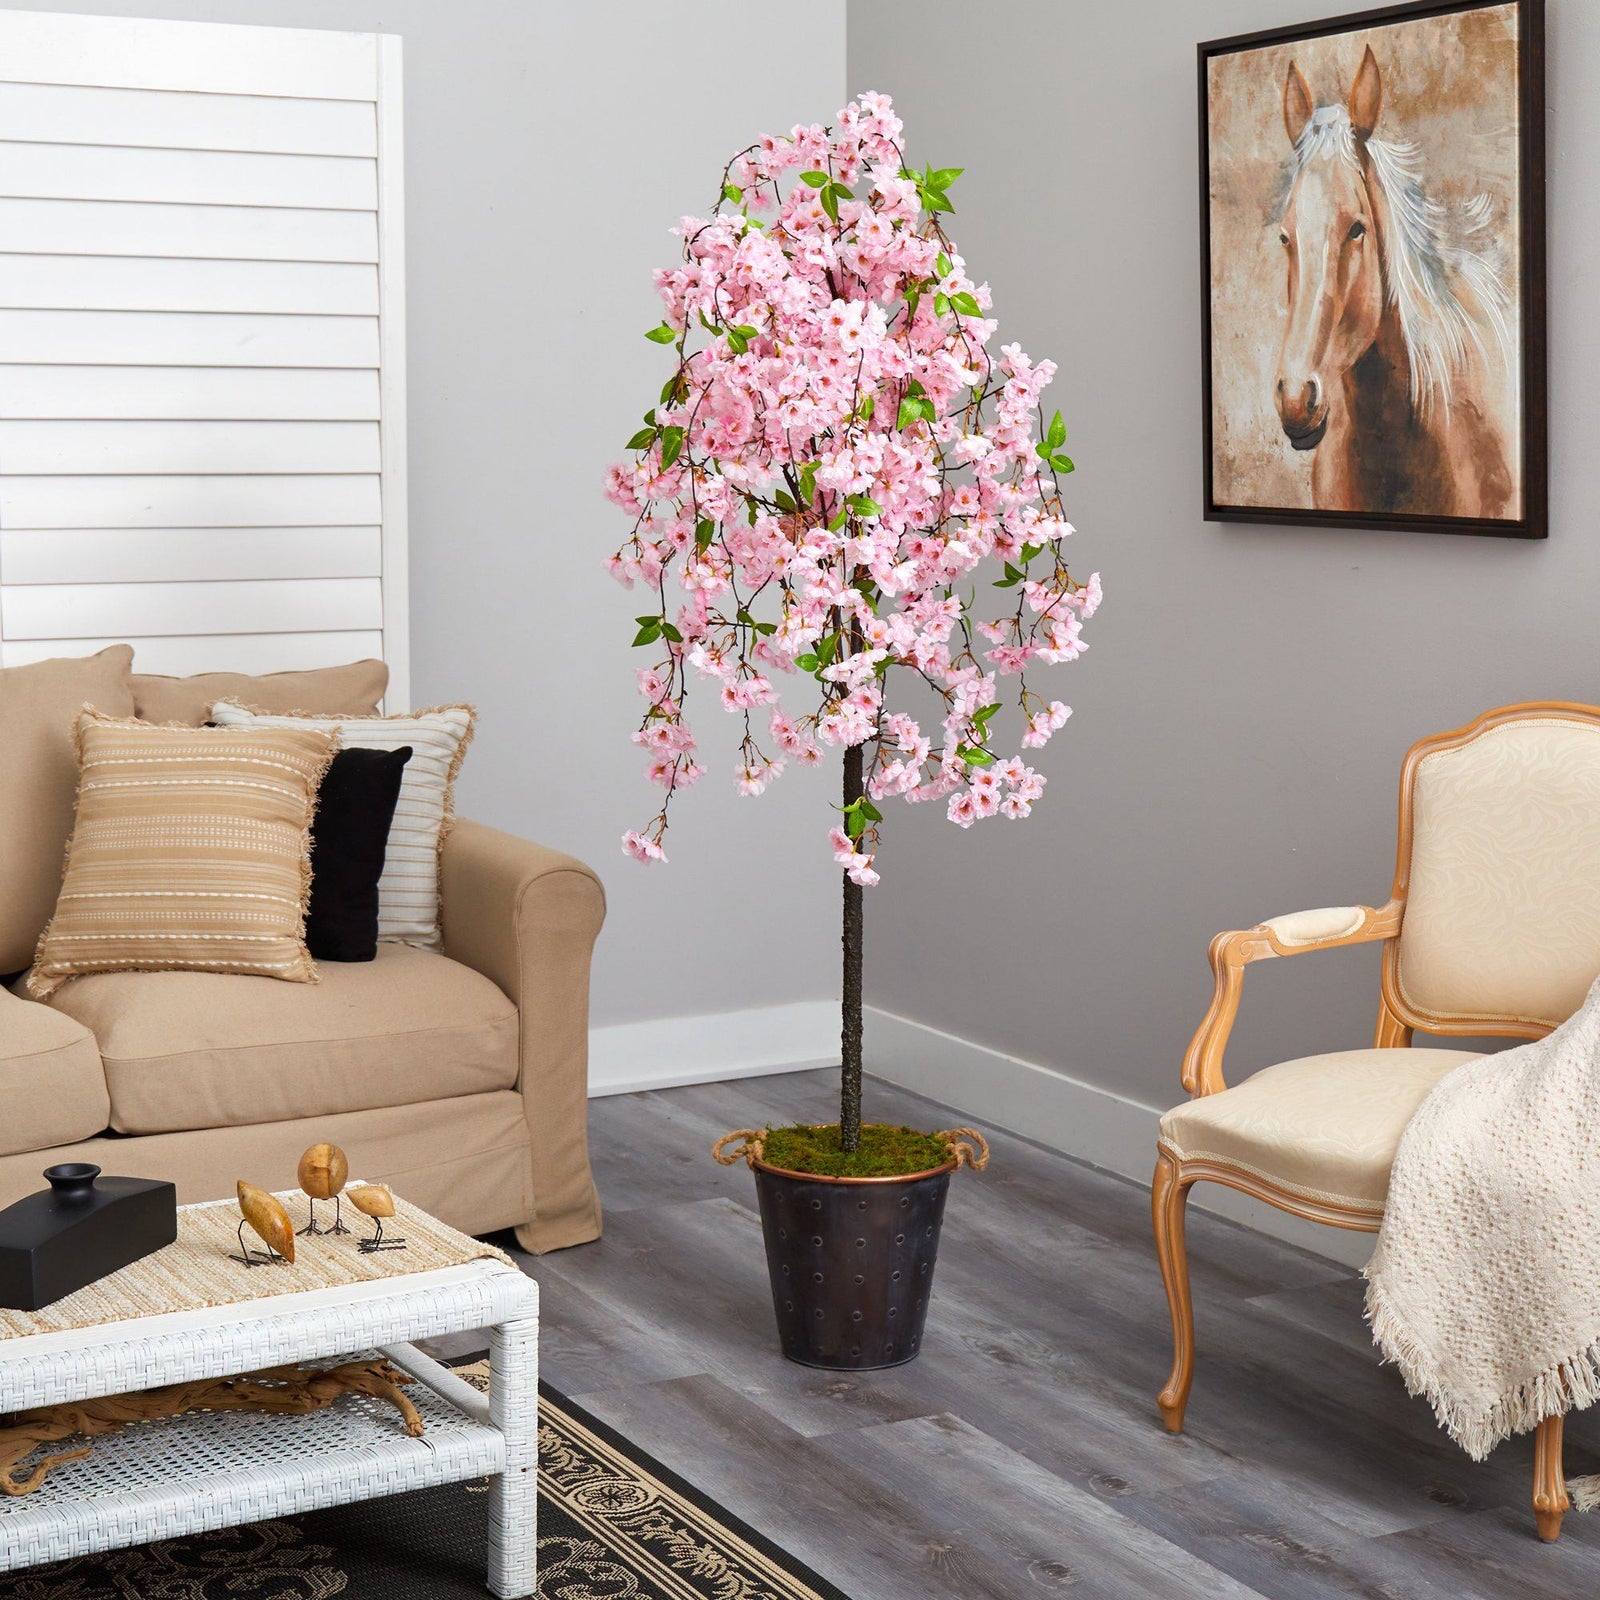 6' Cherry Blossom Artificial Tree in Decorative Metal Pail with Rope ...